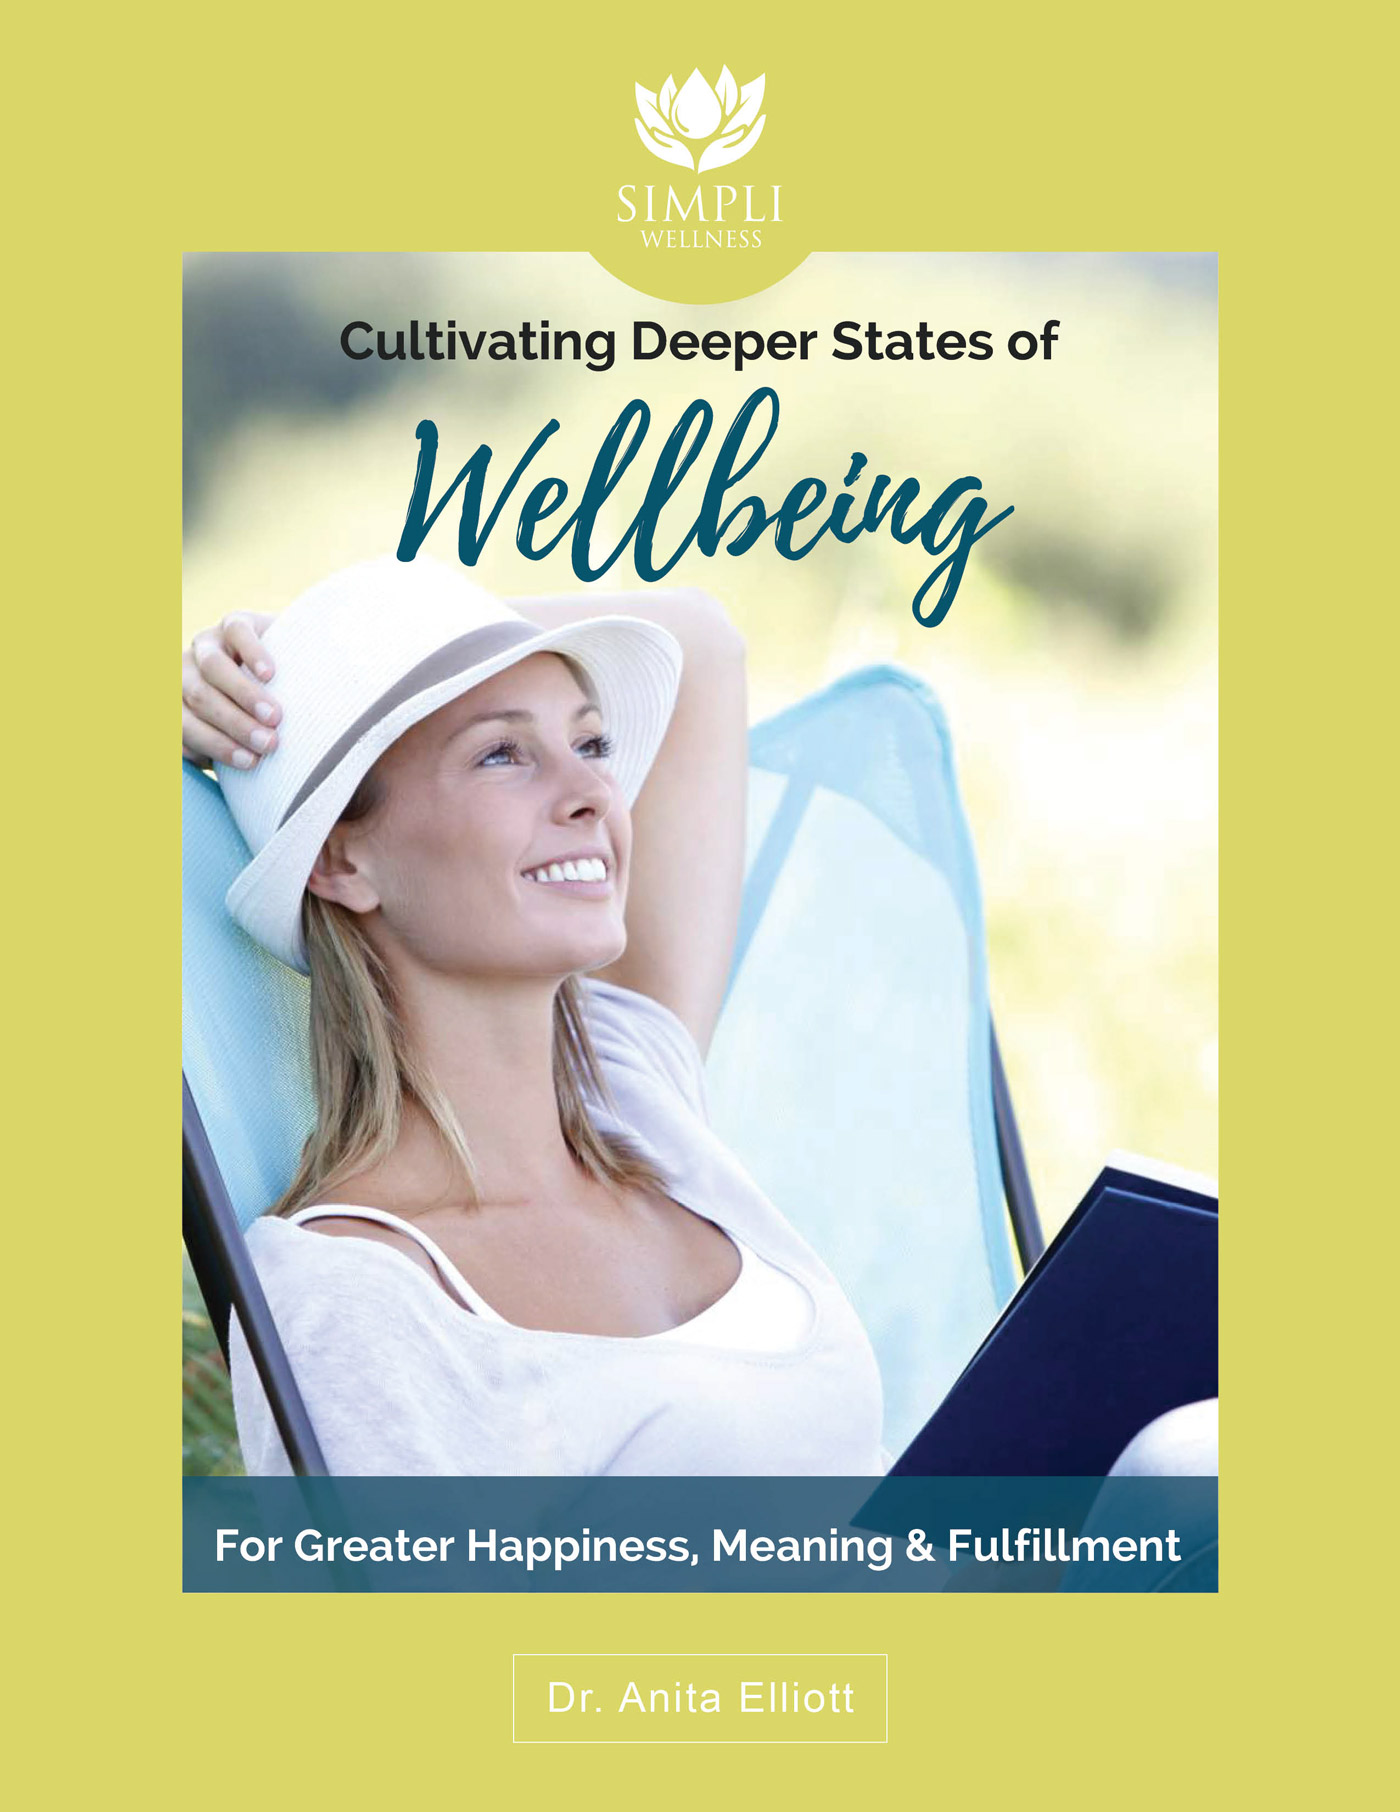 SW_Cultivating_Deeper_States_of_WellBeing-1